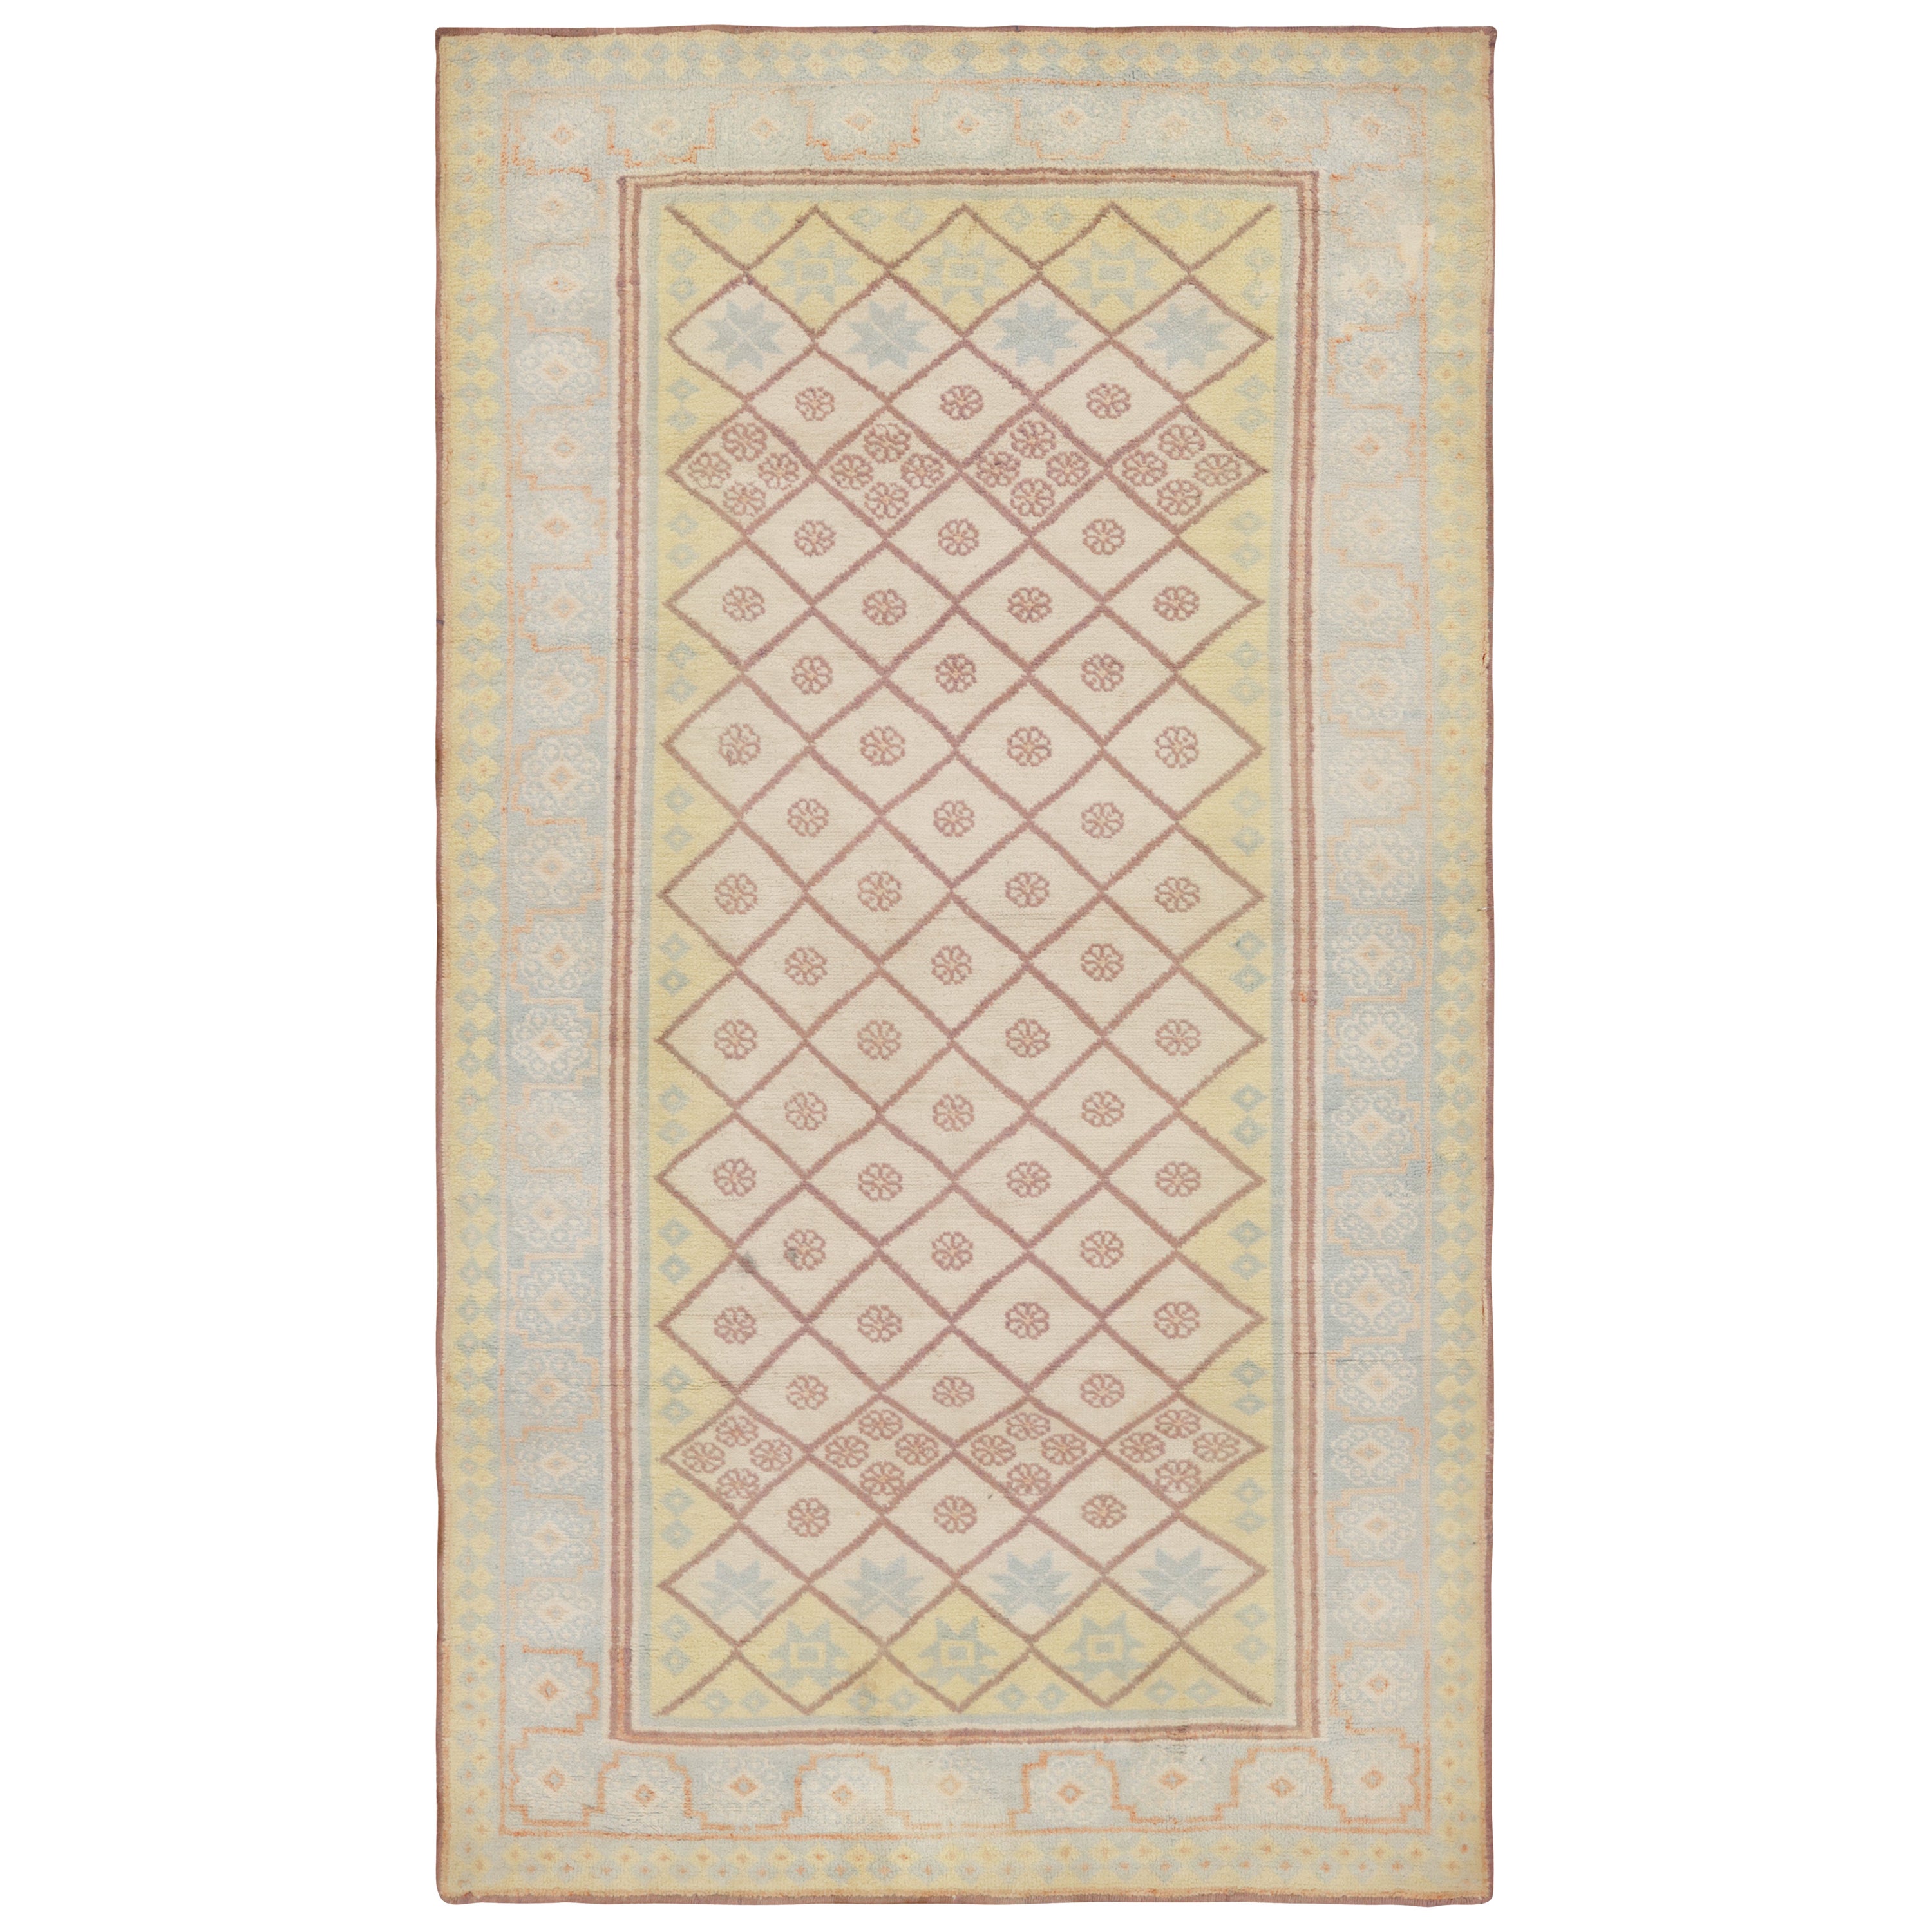 Antique Agra Rug in Cream Tones with Lattice & Floral Patterns, from Rug & Kilim For Sale